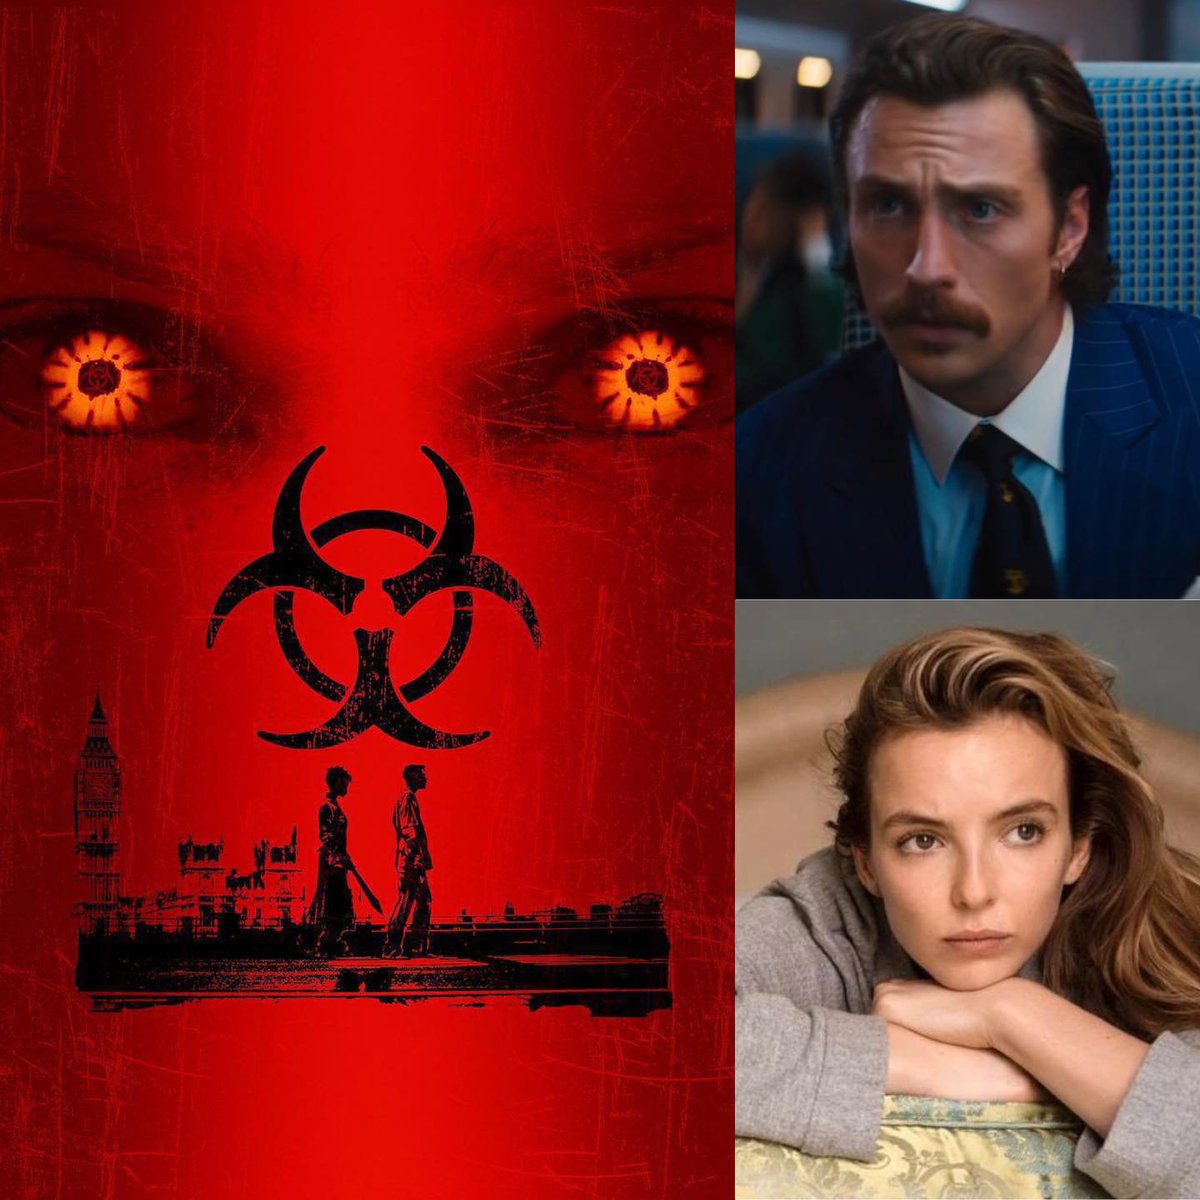 ‘28 YEARS LATER’ will release on June 20, 2025 in theaters.
Starring Jodie Comer, Aaron Taylor-Johnson, Ralph Fiennes and Jack O’Connell.
#28yearslater #jodiecomer #aarontaylorjohnson #ralphfiennes #jackoconnell #movienews  #films #moviemagicwithbrian #foryou #foryourpage